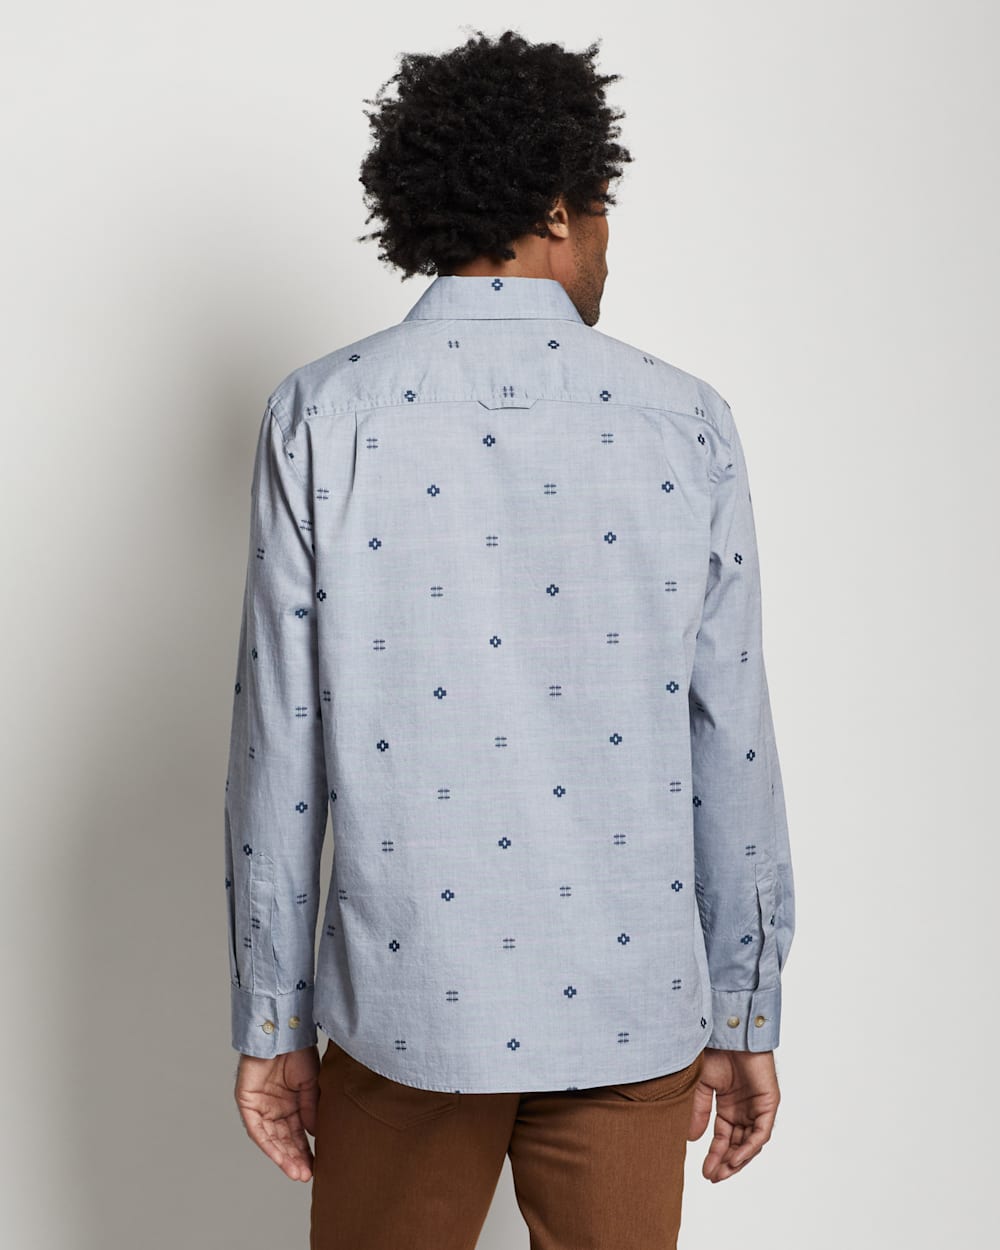 ALTERNATE VIEW OF MEN'S LONG-SLEEVE CARSON CHAMBRAY DOBBY SHIRT IN SILVER BLUE image number 3